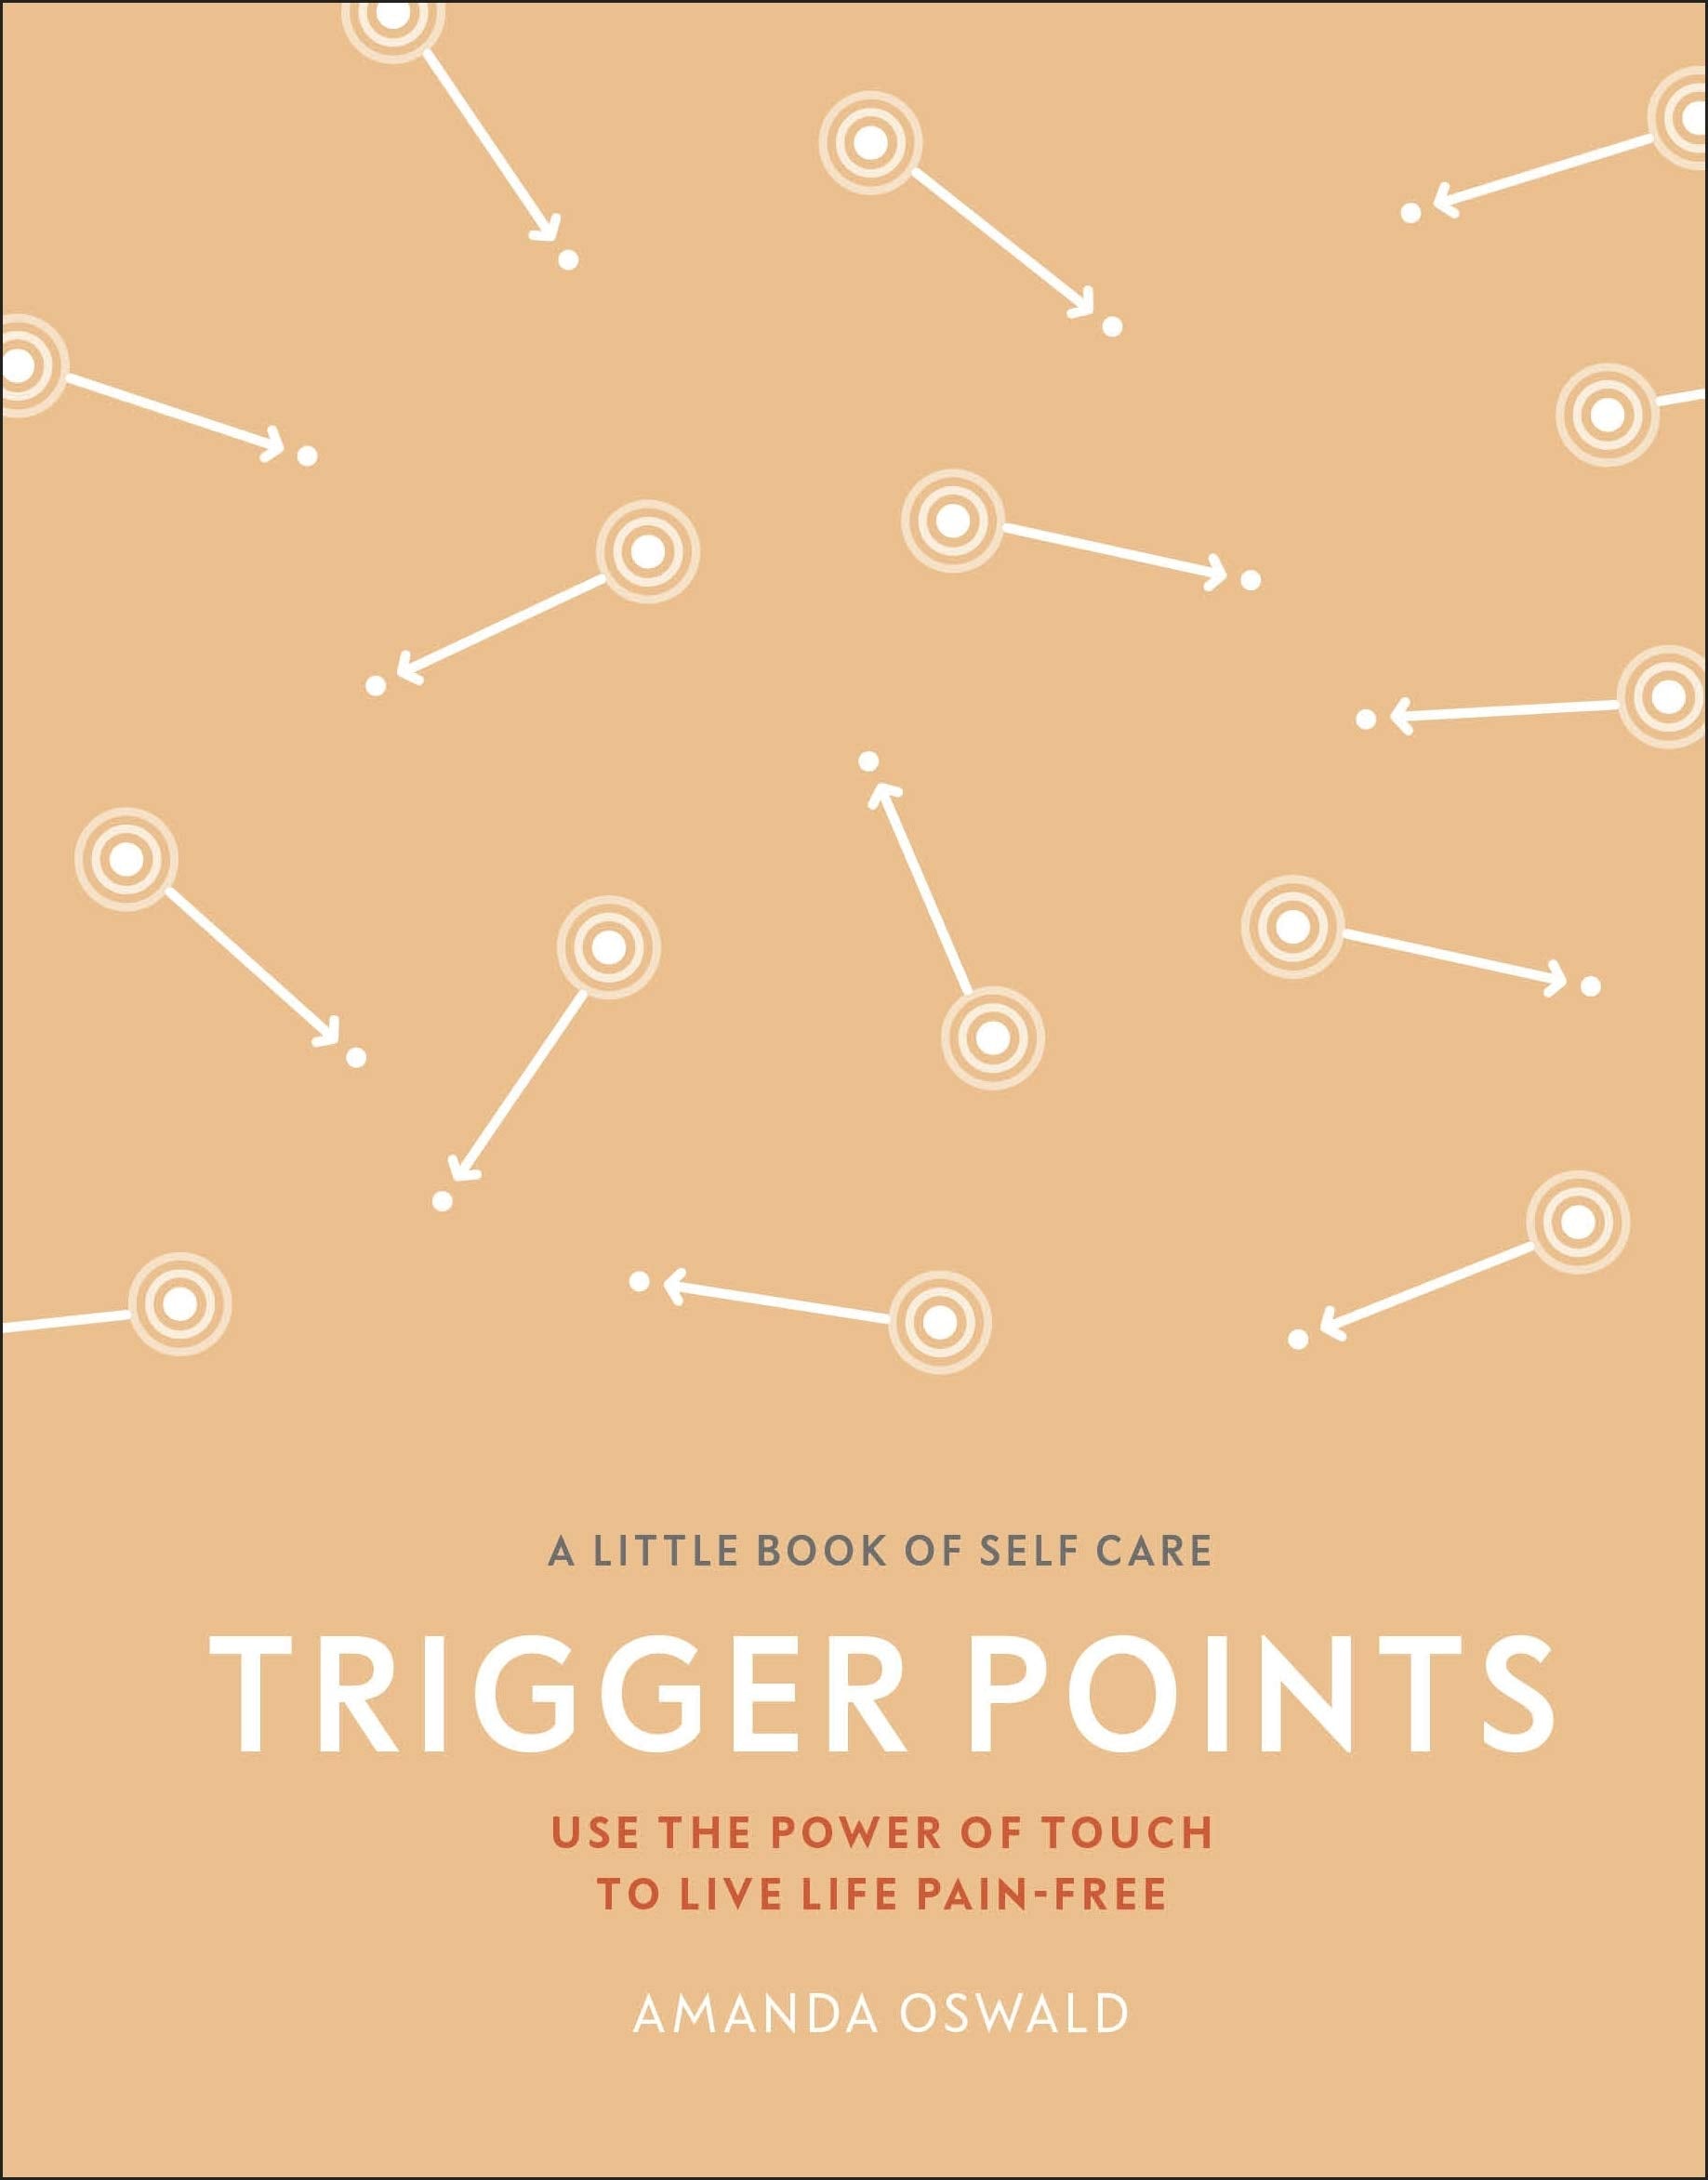 Trigger points: Little book of self care